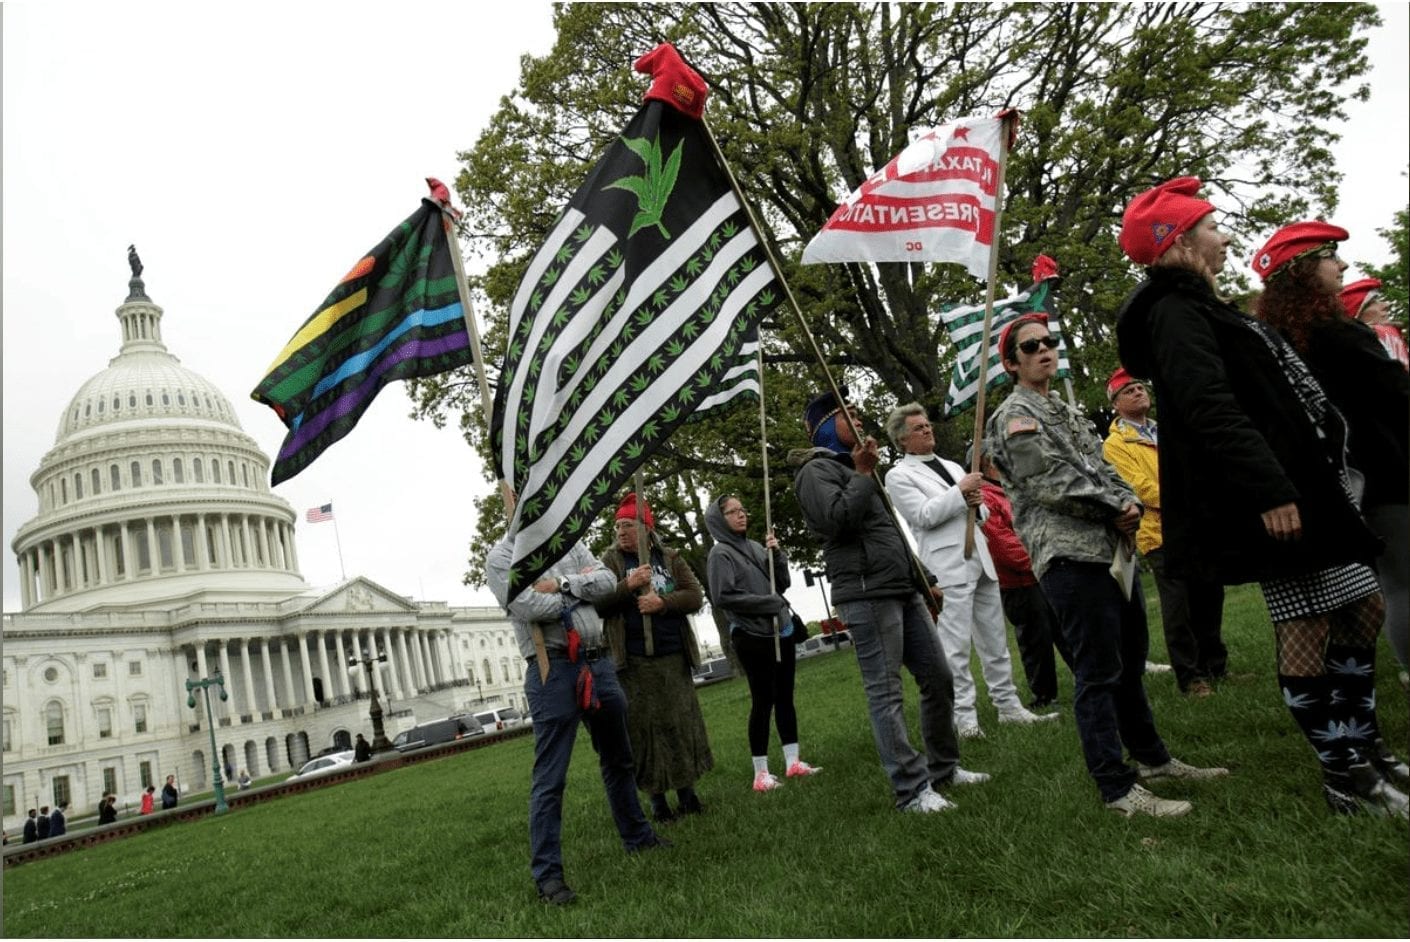 FILE PHOTO: Protesters gather to smoke marijuana on steps of the U.S. Capitol to tell Congress to "De-schedule Cannabis Now", in Washington, U.S. April 24, 2017. REUTERS/Yuri Gripas/File Photo